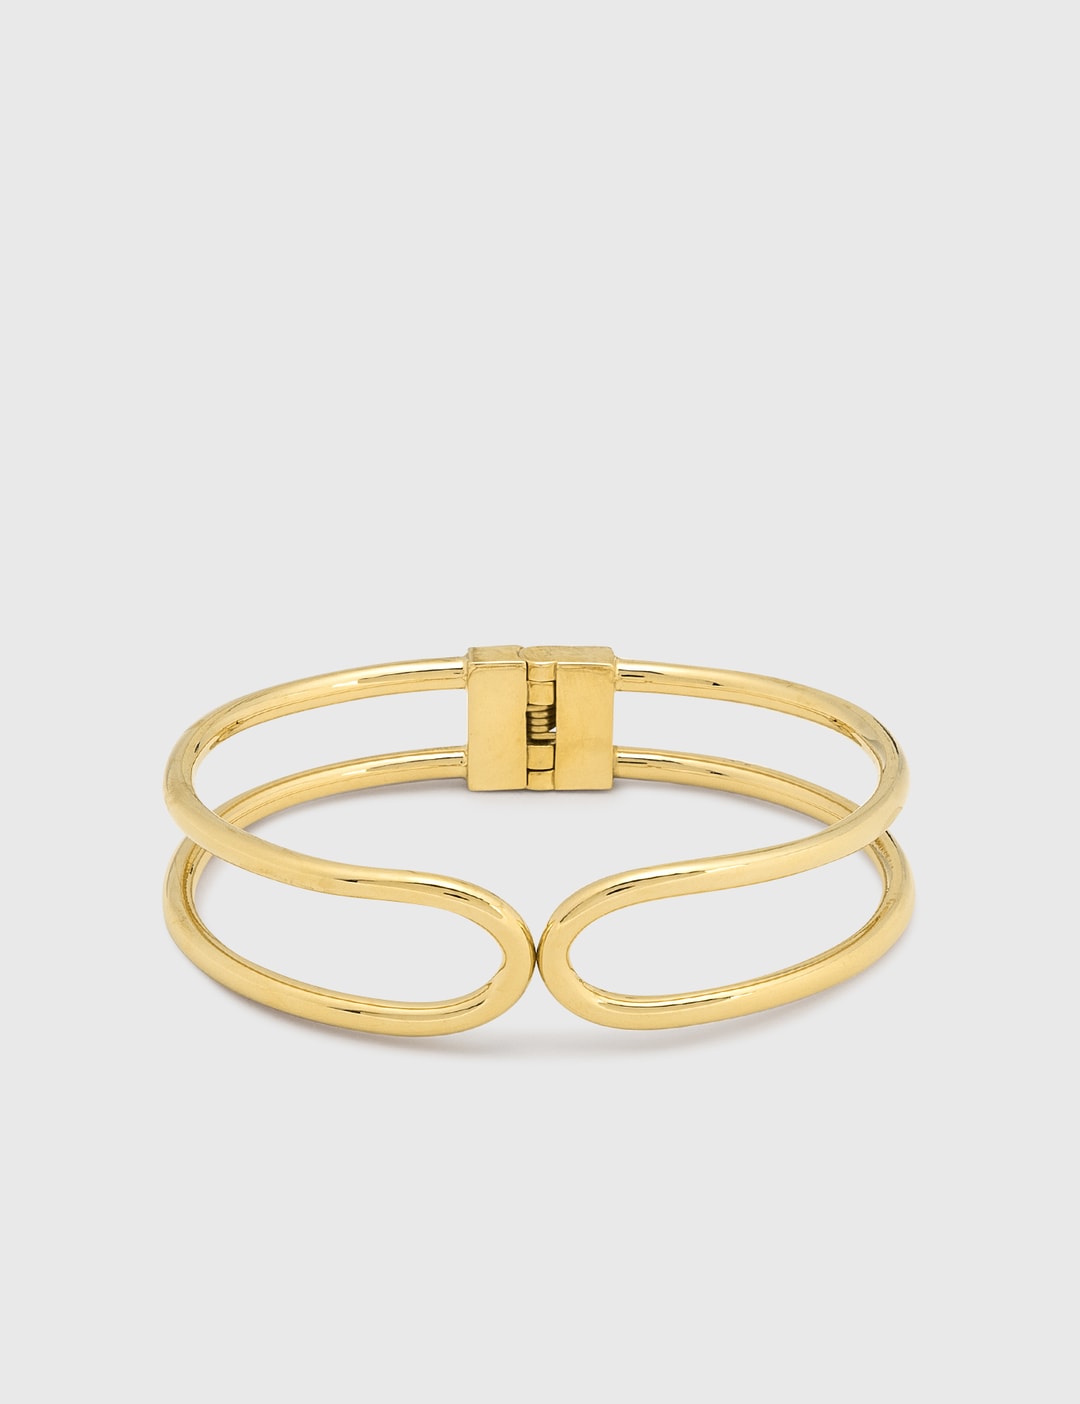 Undercover - Hinge Bracelet | HBX - Globally Curated Fashion and ...